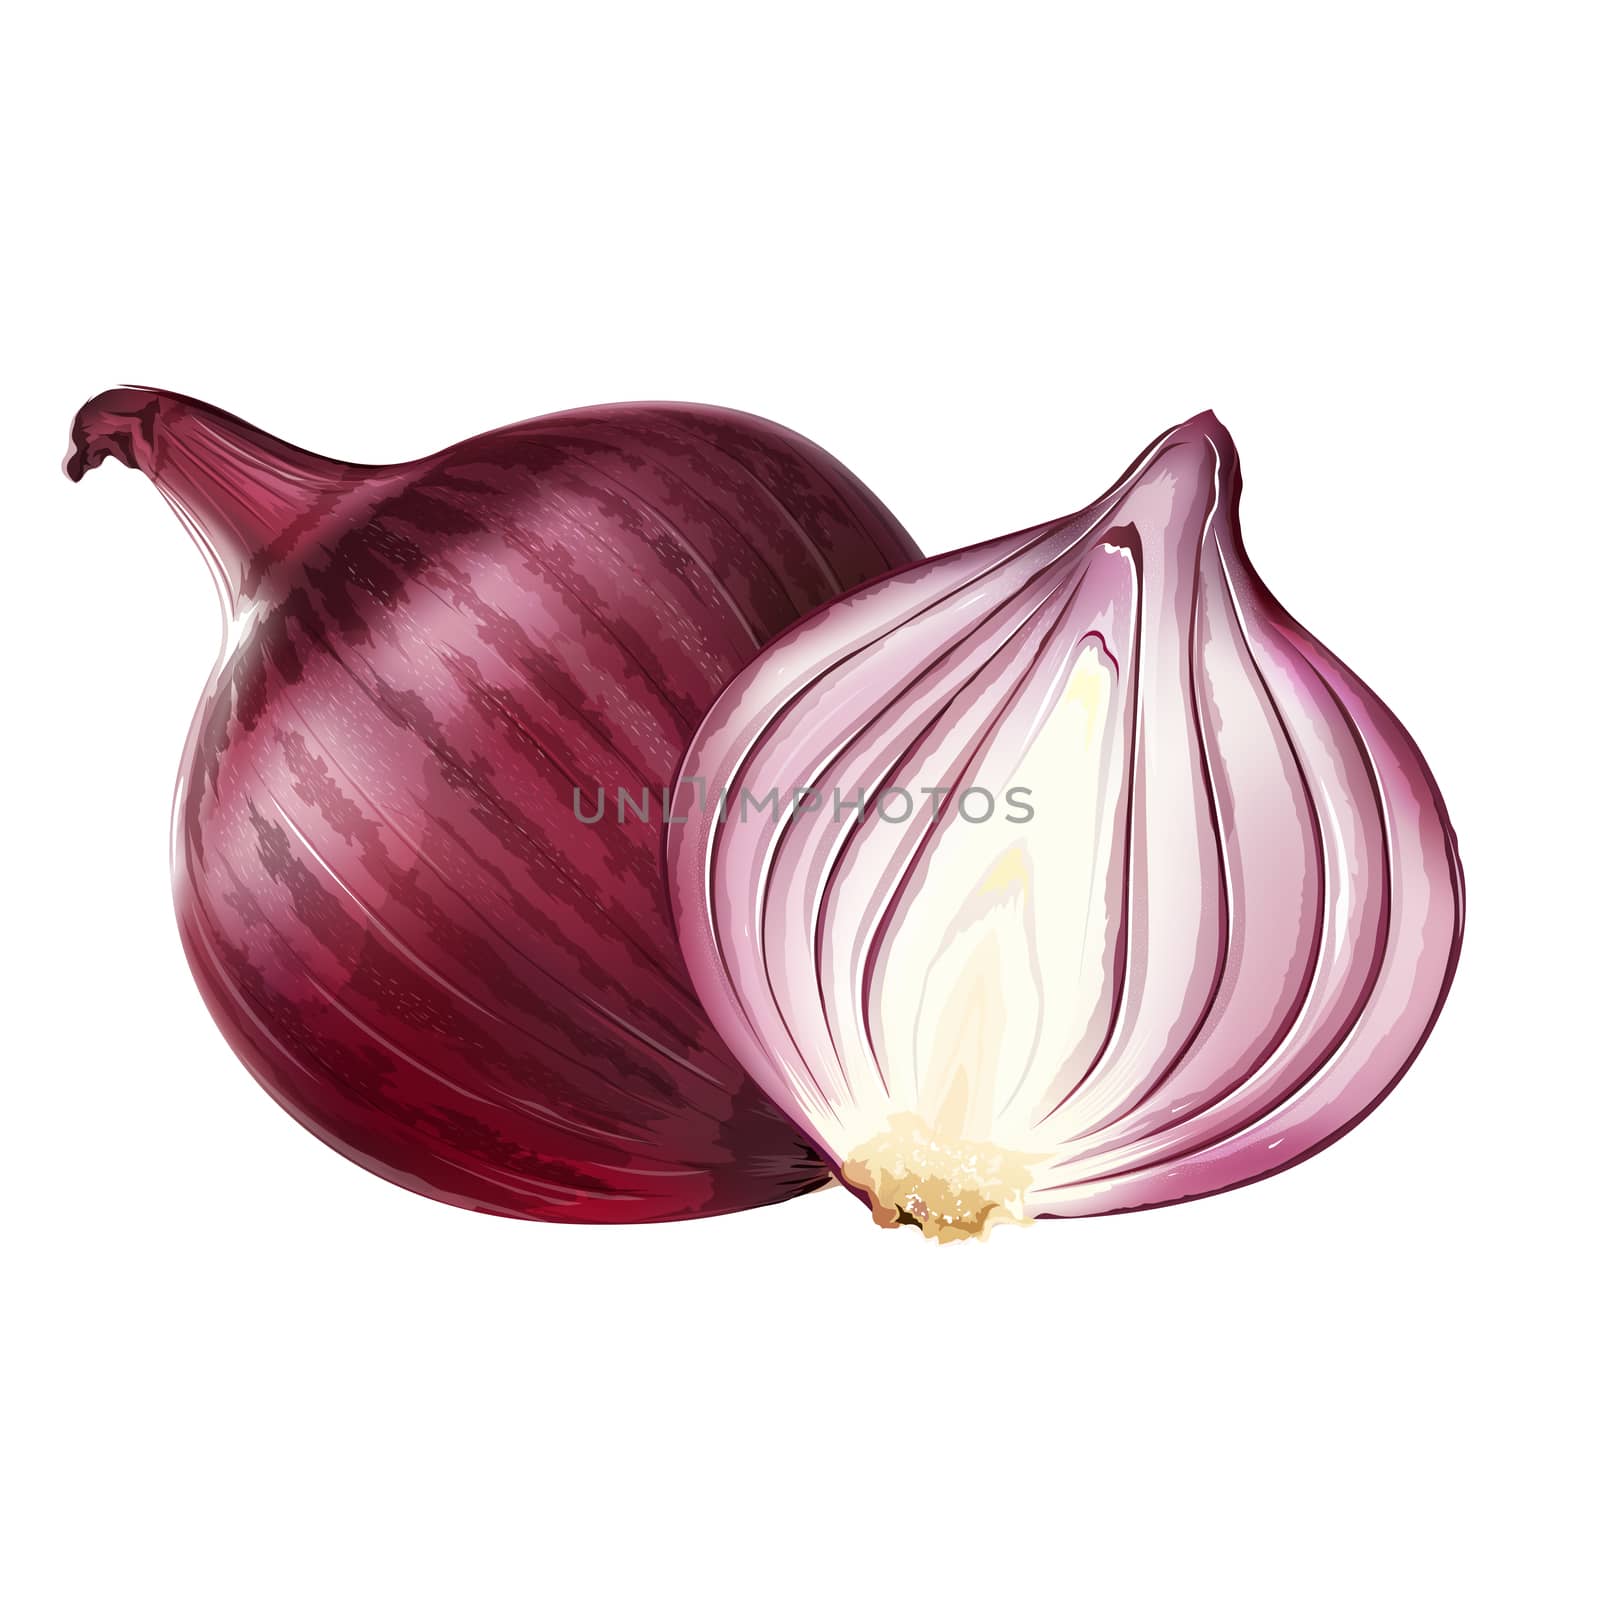 Red onion isolated realistic illustration on white background.